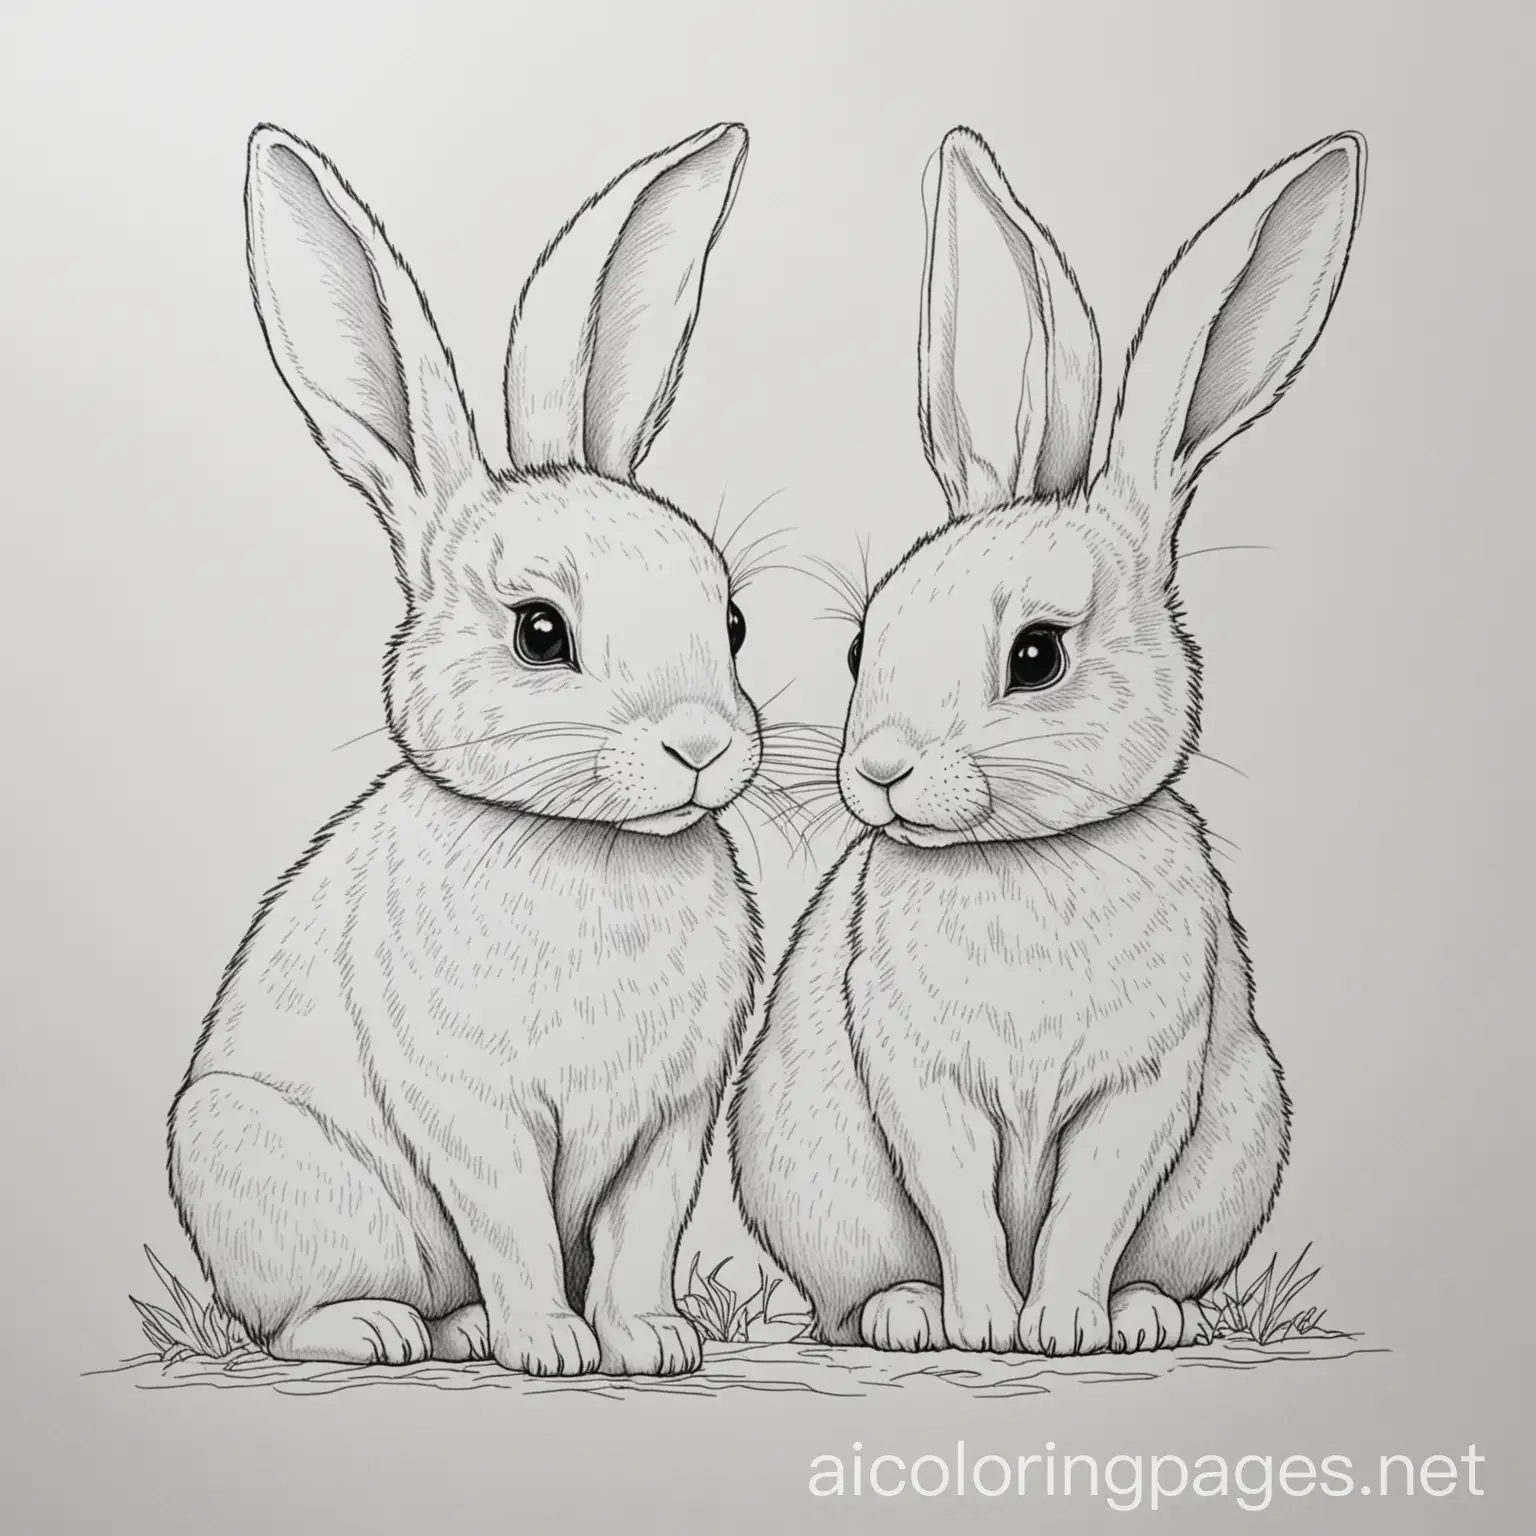 Rabbits-Coloring-Page-with-Ample-White-Space